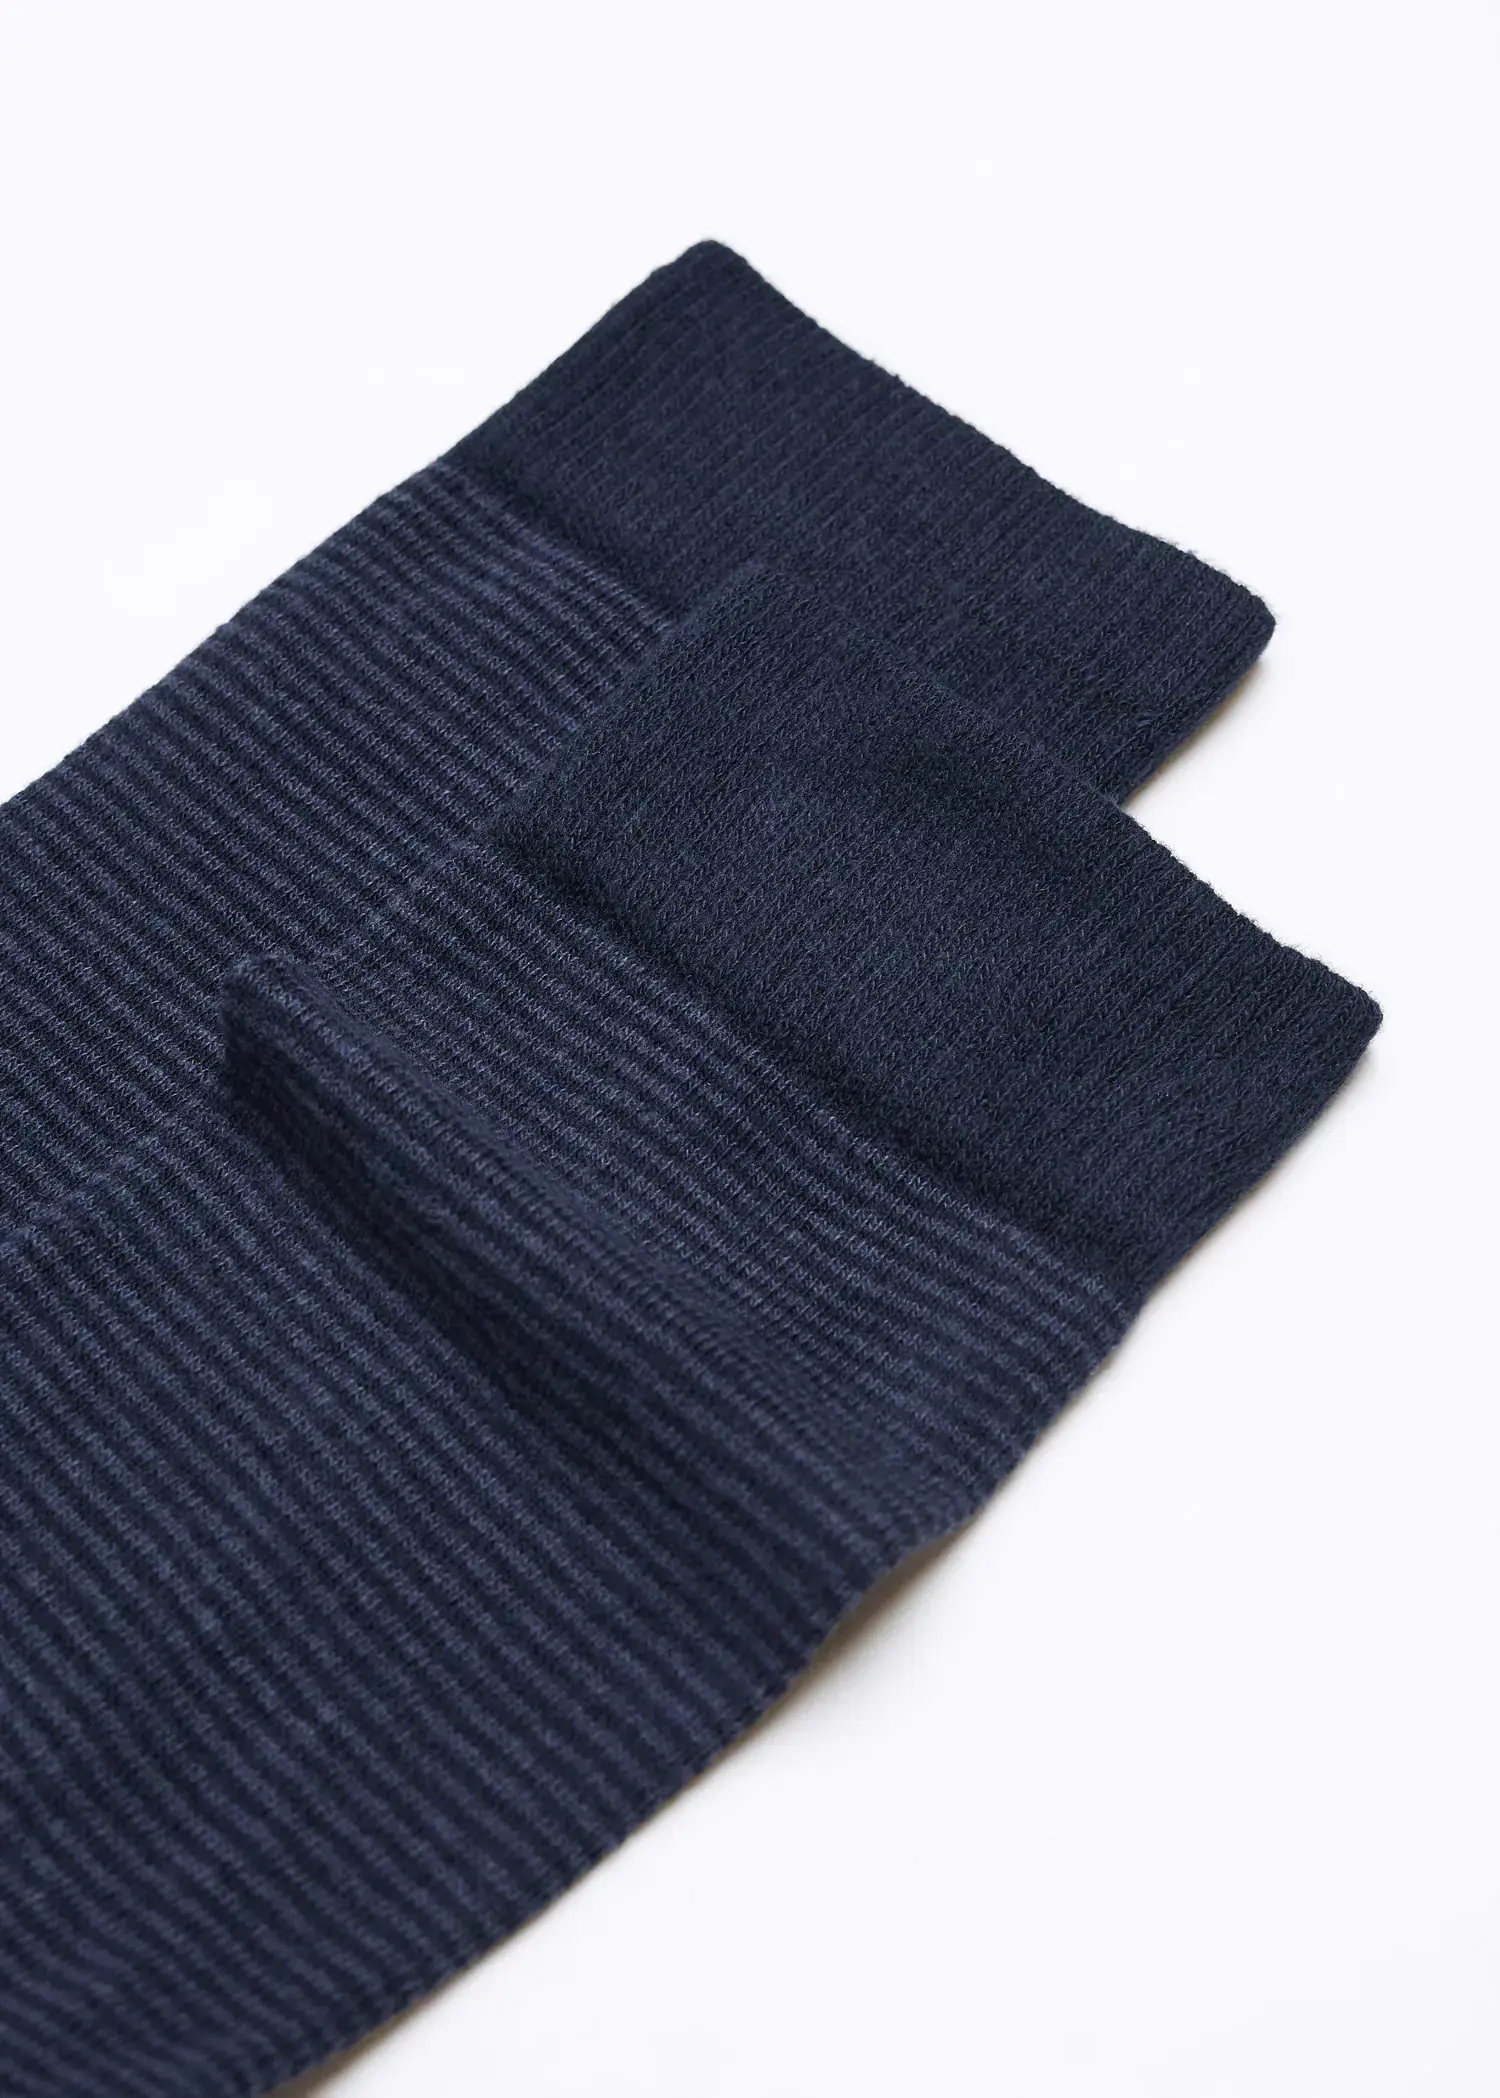 Mango Striped cotton socks. a close up of a pair of socks on a table 